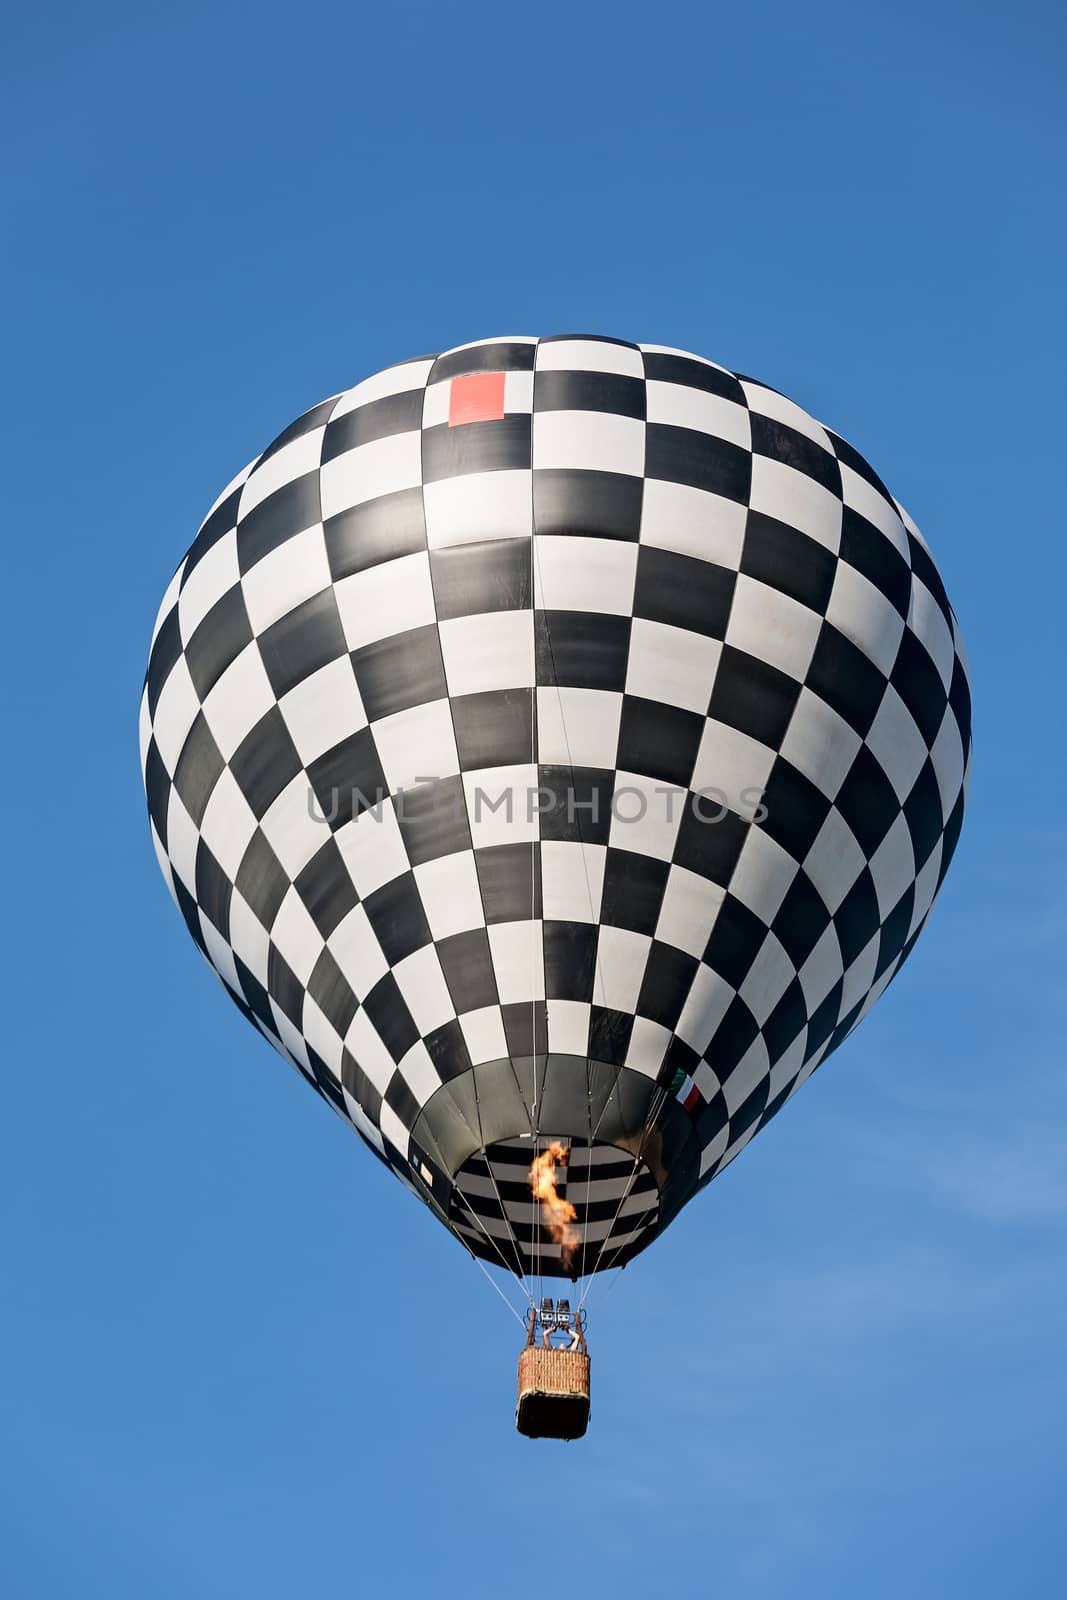 Black and white balloon in flight against a blue sky